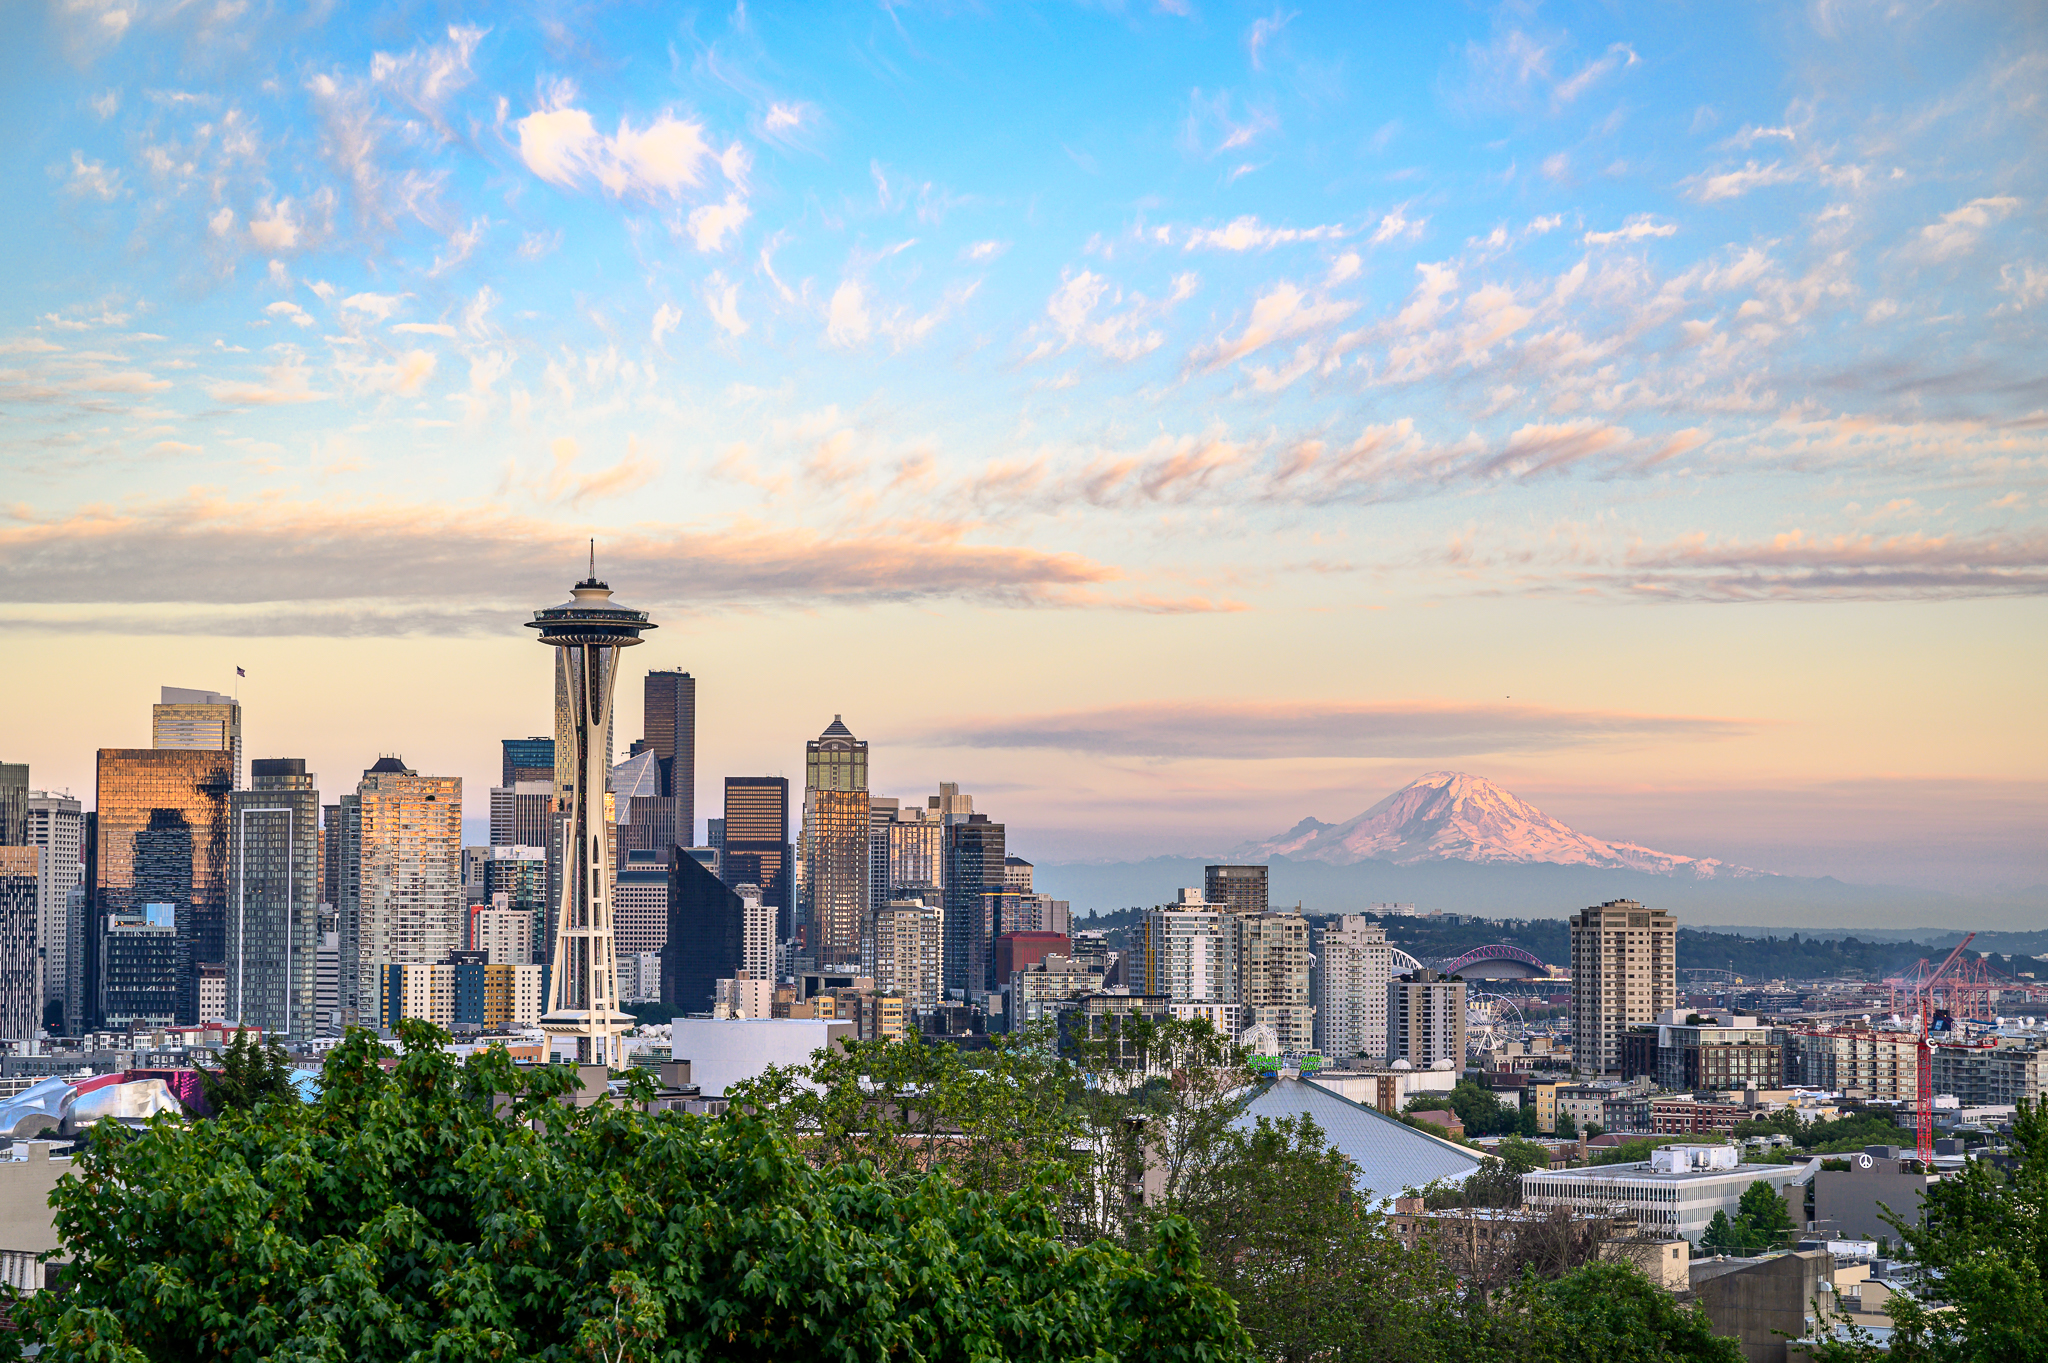 Gorgeous Seattle skyline and Mount Rainier views from Kerry Park